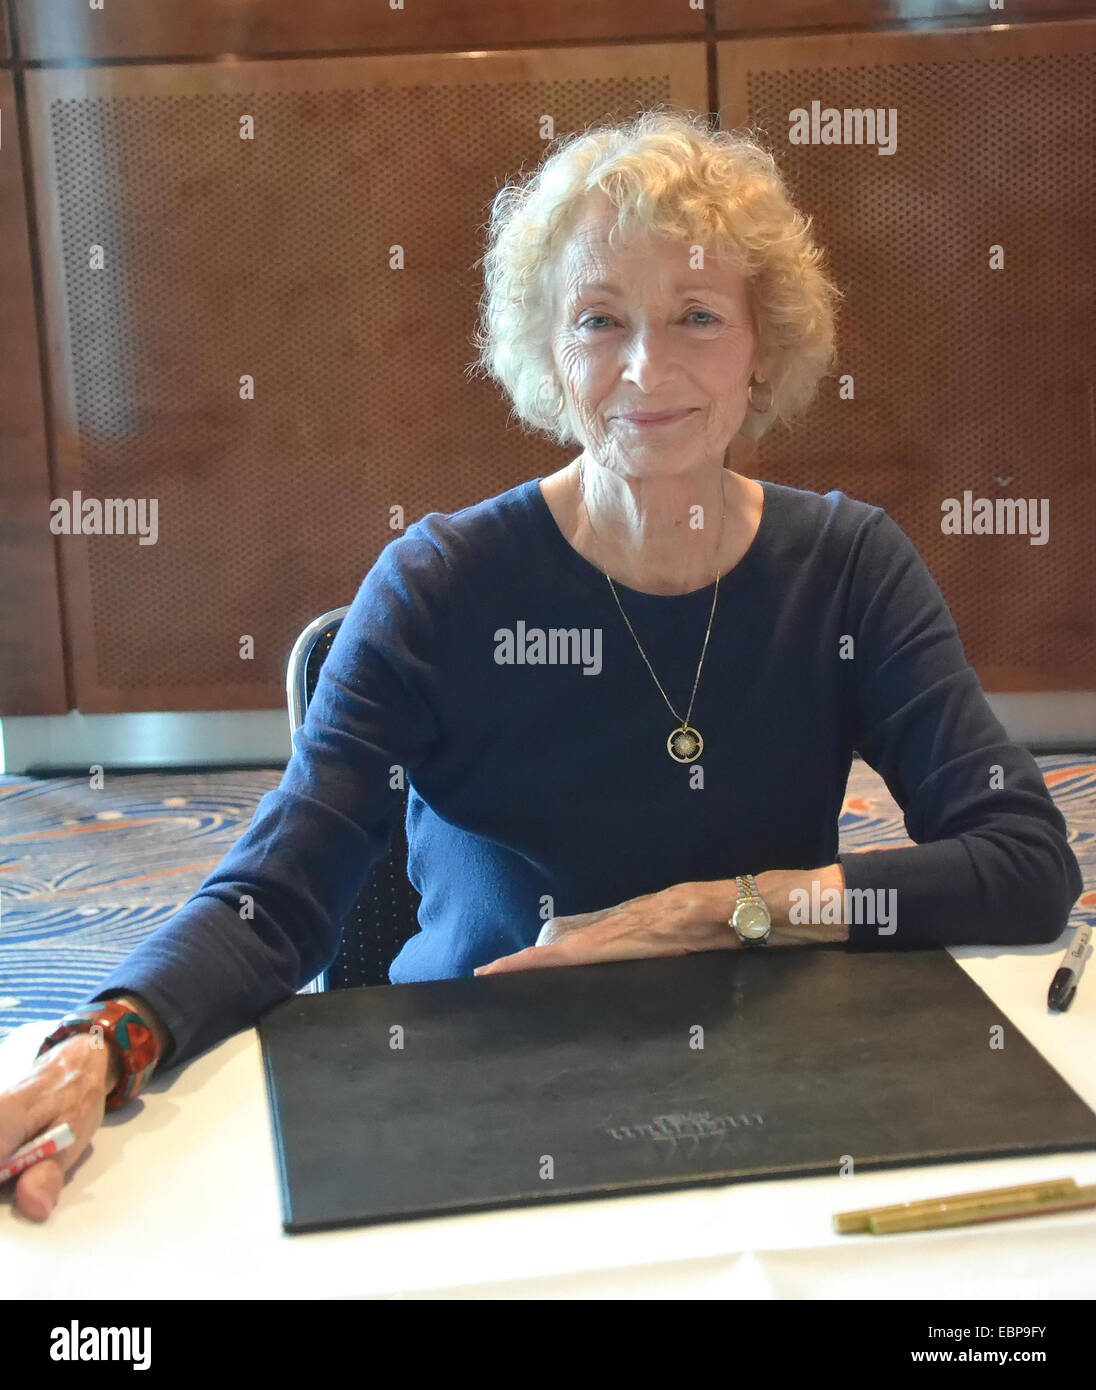 Actors from popular Sci-Fi films attend an autograph session at FedCon 23  Featuring: Diana Muldaur Where: Dusseldorf, Germany When: 31 May 2014 Stock Photo